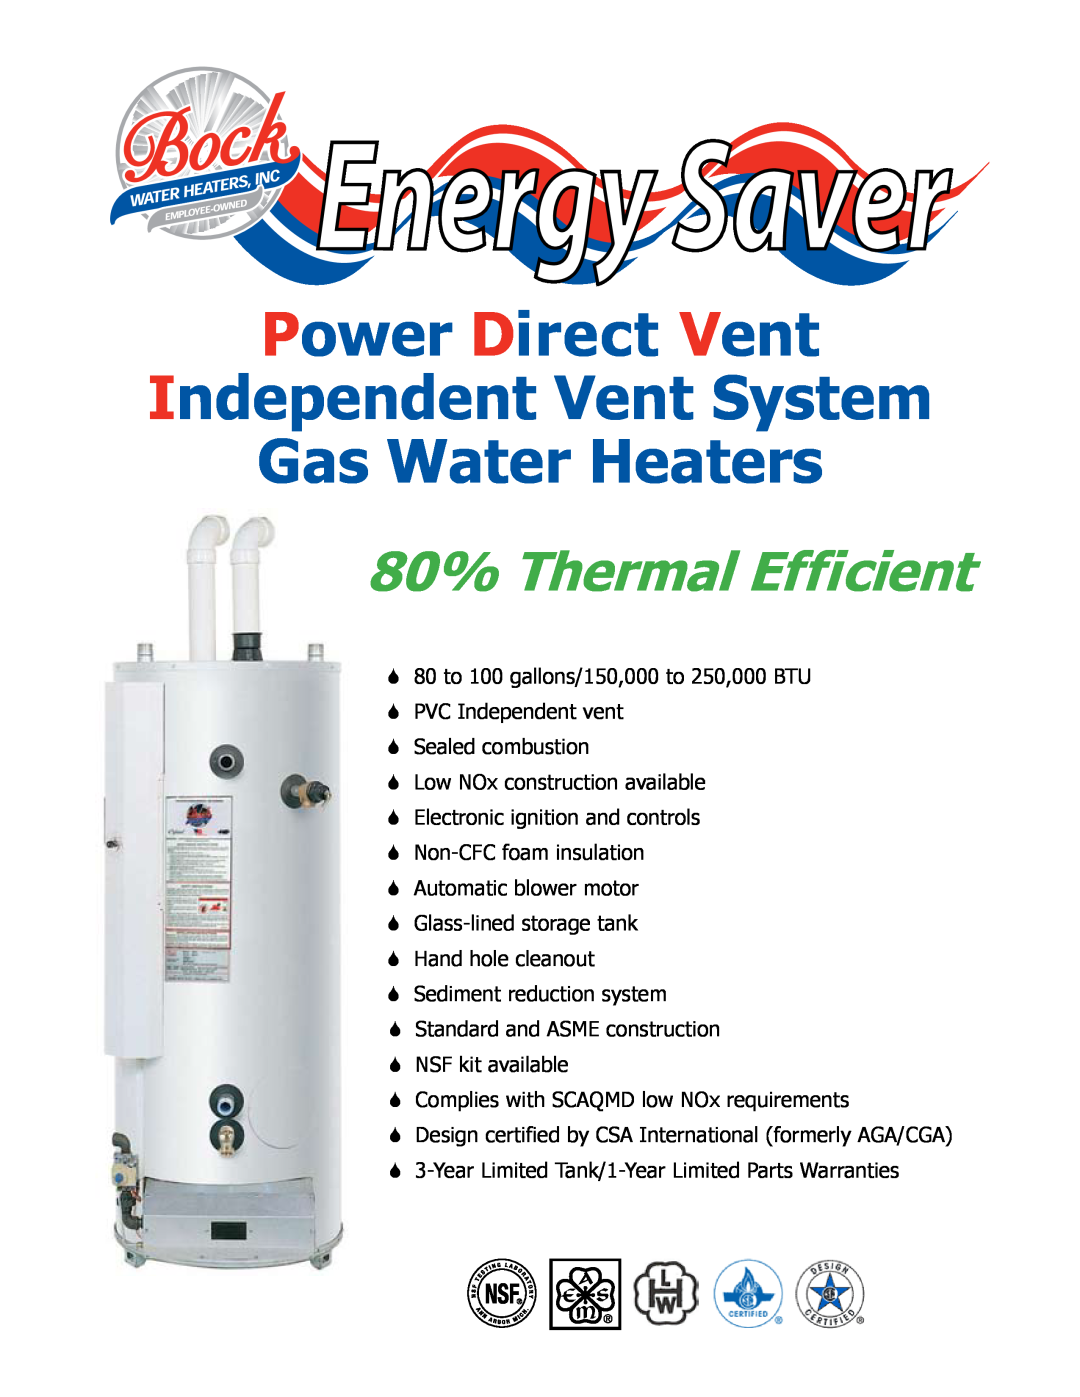 Bock Water heaters 80PDVI-250-NA-A manual Energy Saver, Power Direct Vent Independent Vent System Gas Water Heaters 